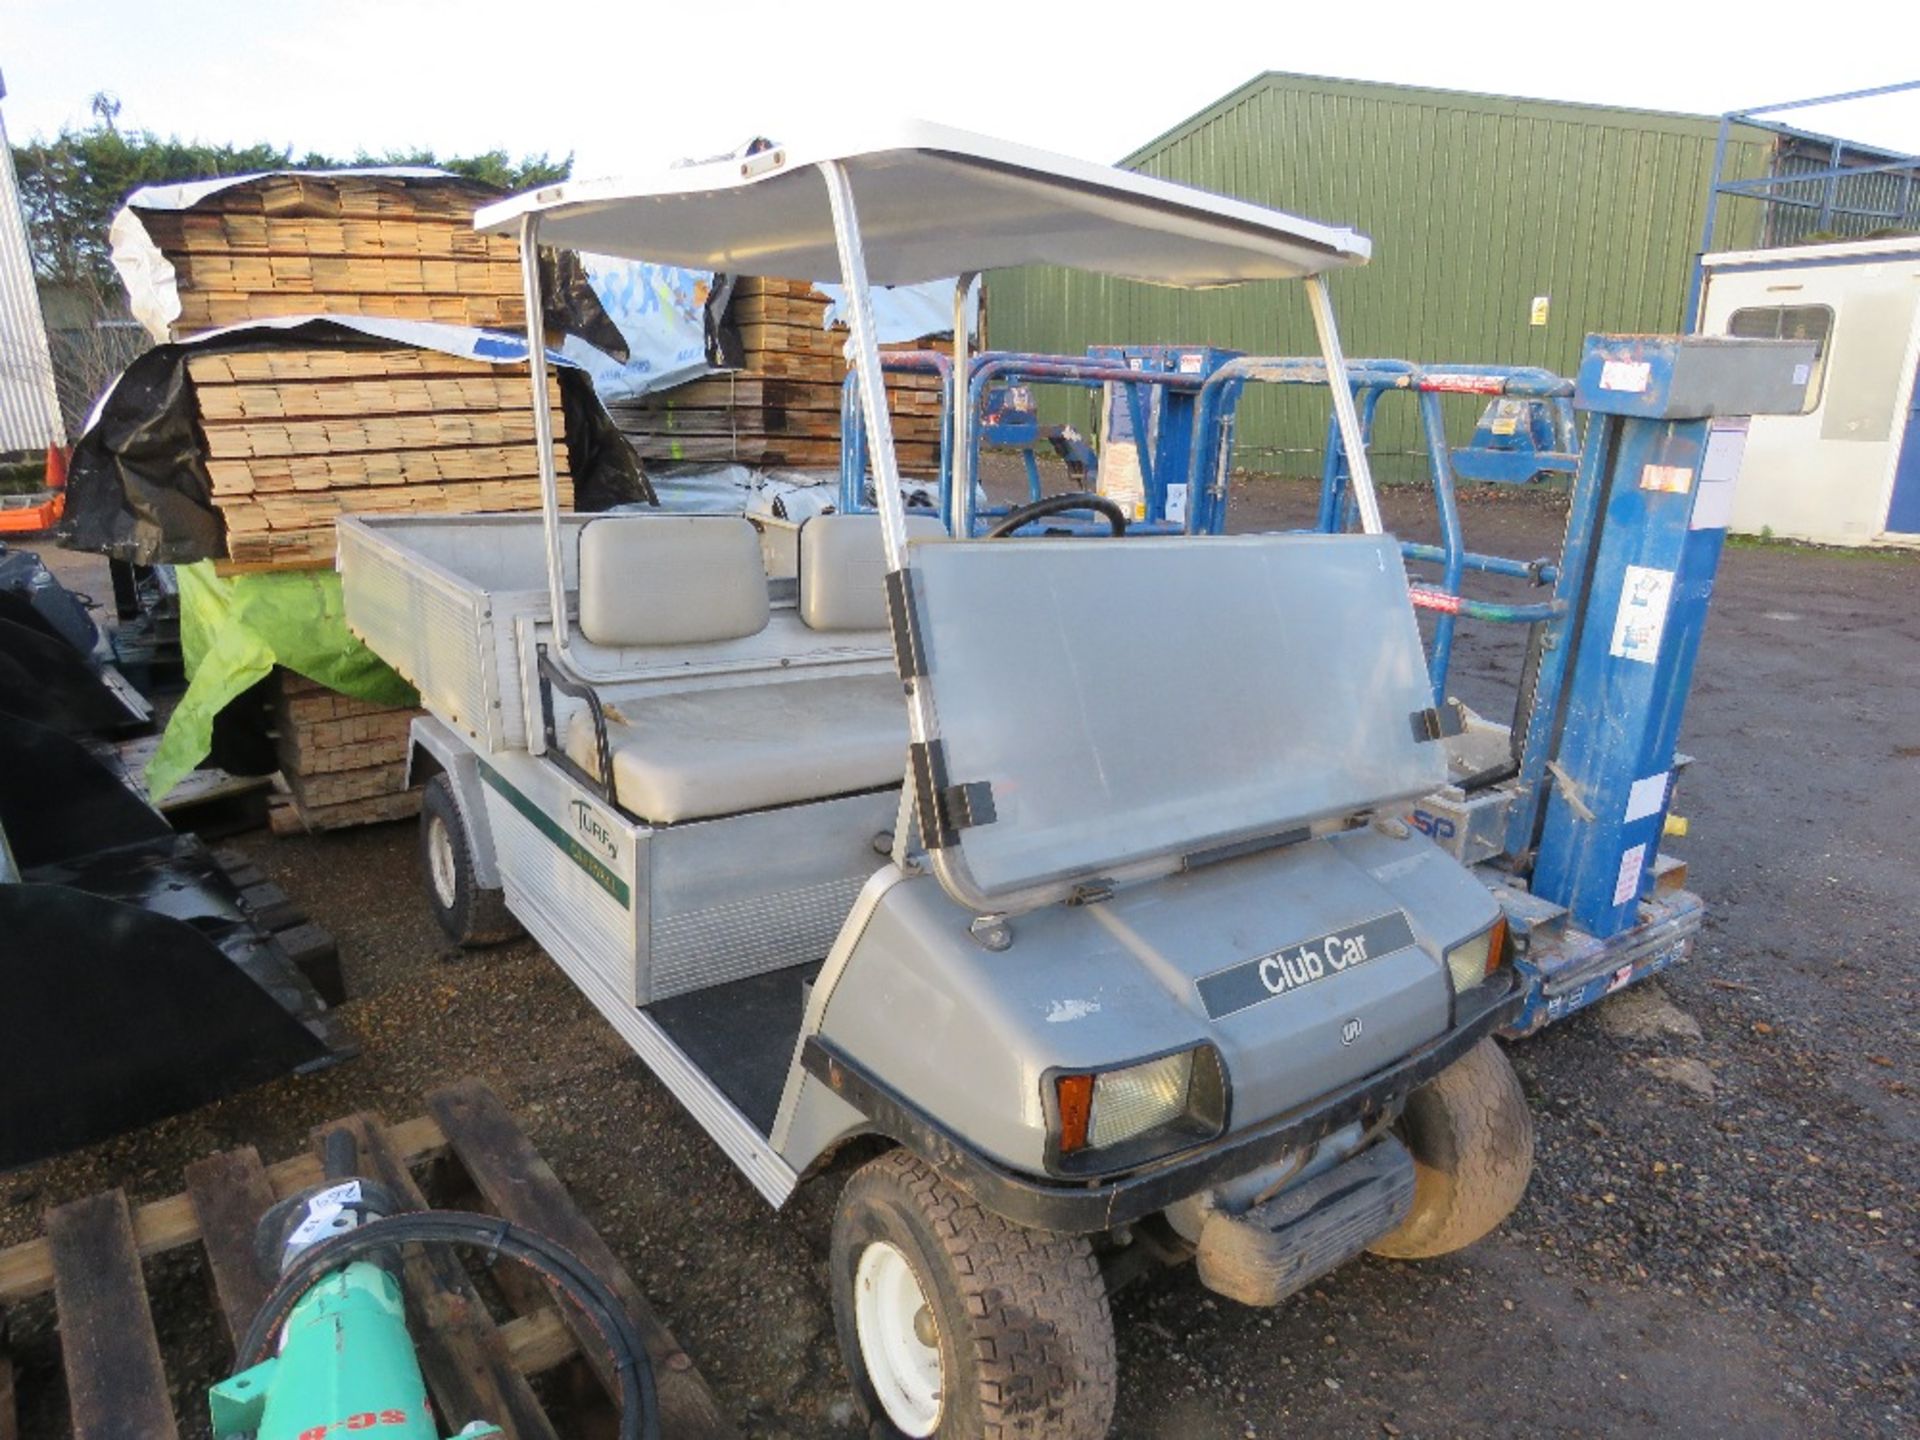 CLUBCAR CARRYALL TURF 2 PETROL ENGINED UTILITY TRUCK. WHEN TESTED WAS SEEN TO DRIVE, STEER AND BRAKE - Image 2 of 11